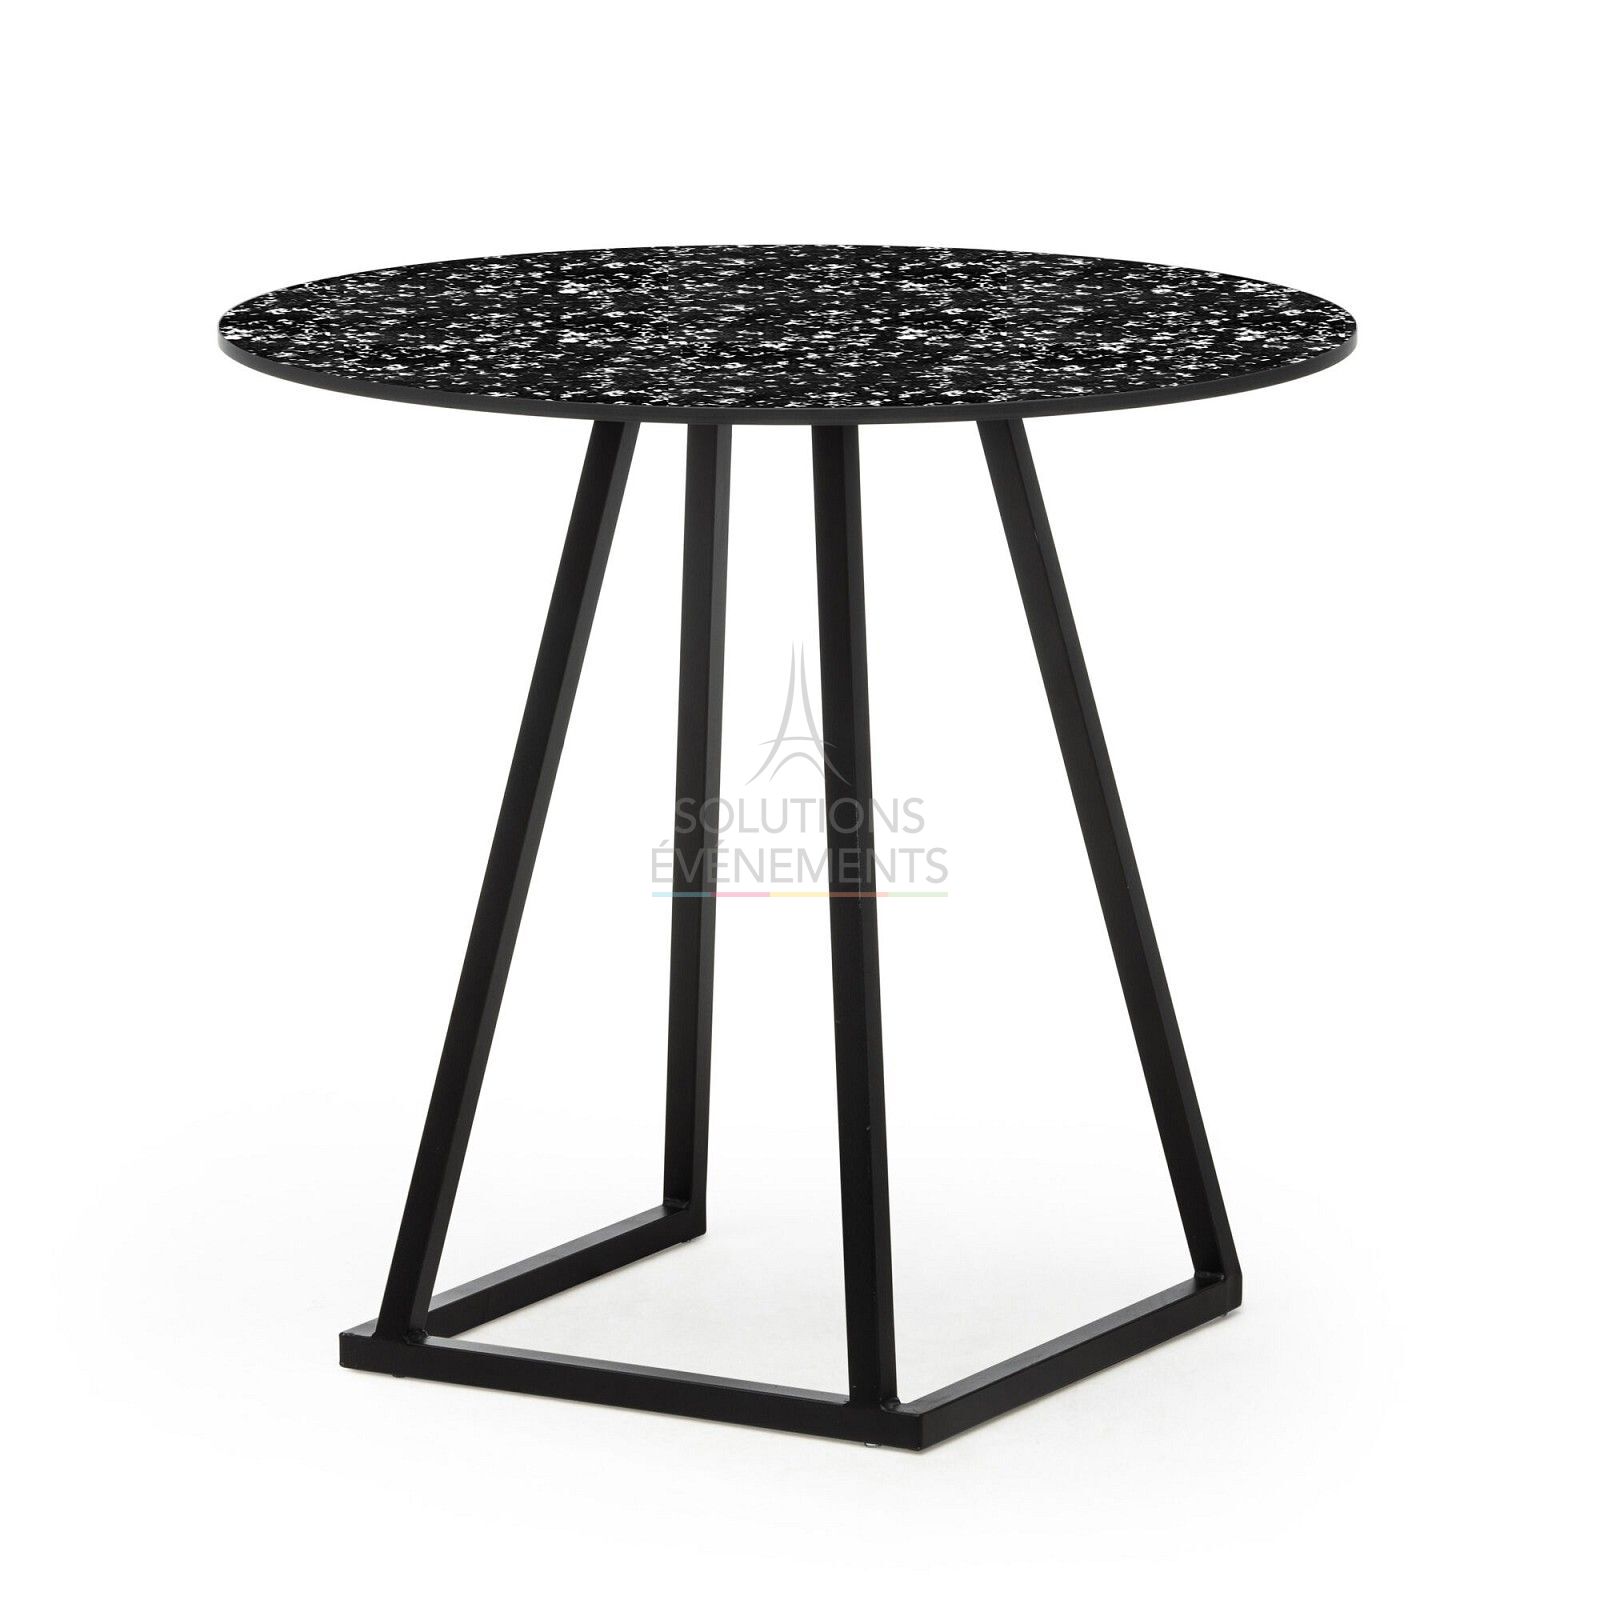 Rental of small eco-responsible pedestal table with round top